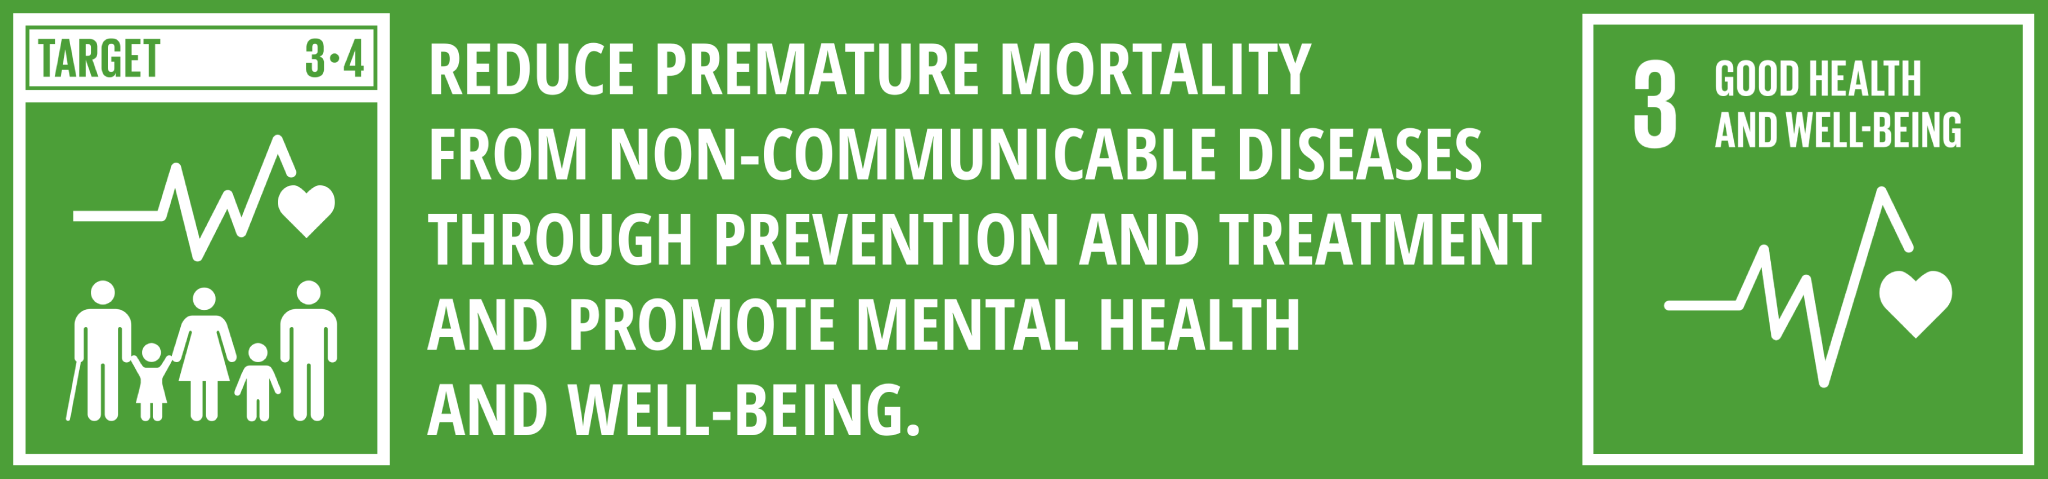 SDG Goal 3 Target 3.4: Reduce premature mortality from non-communicable diseases through prevention and treatment and promote mental health and well-being.